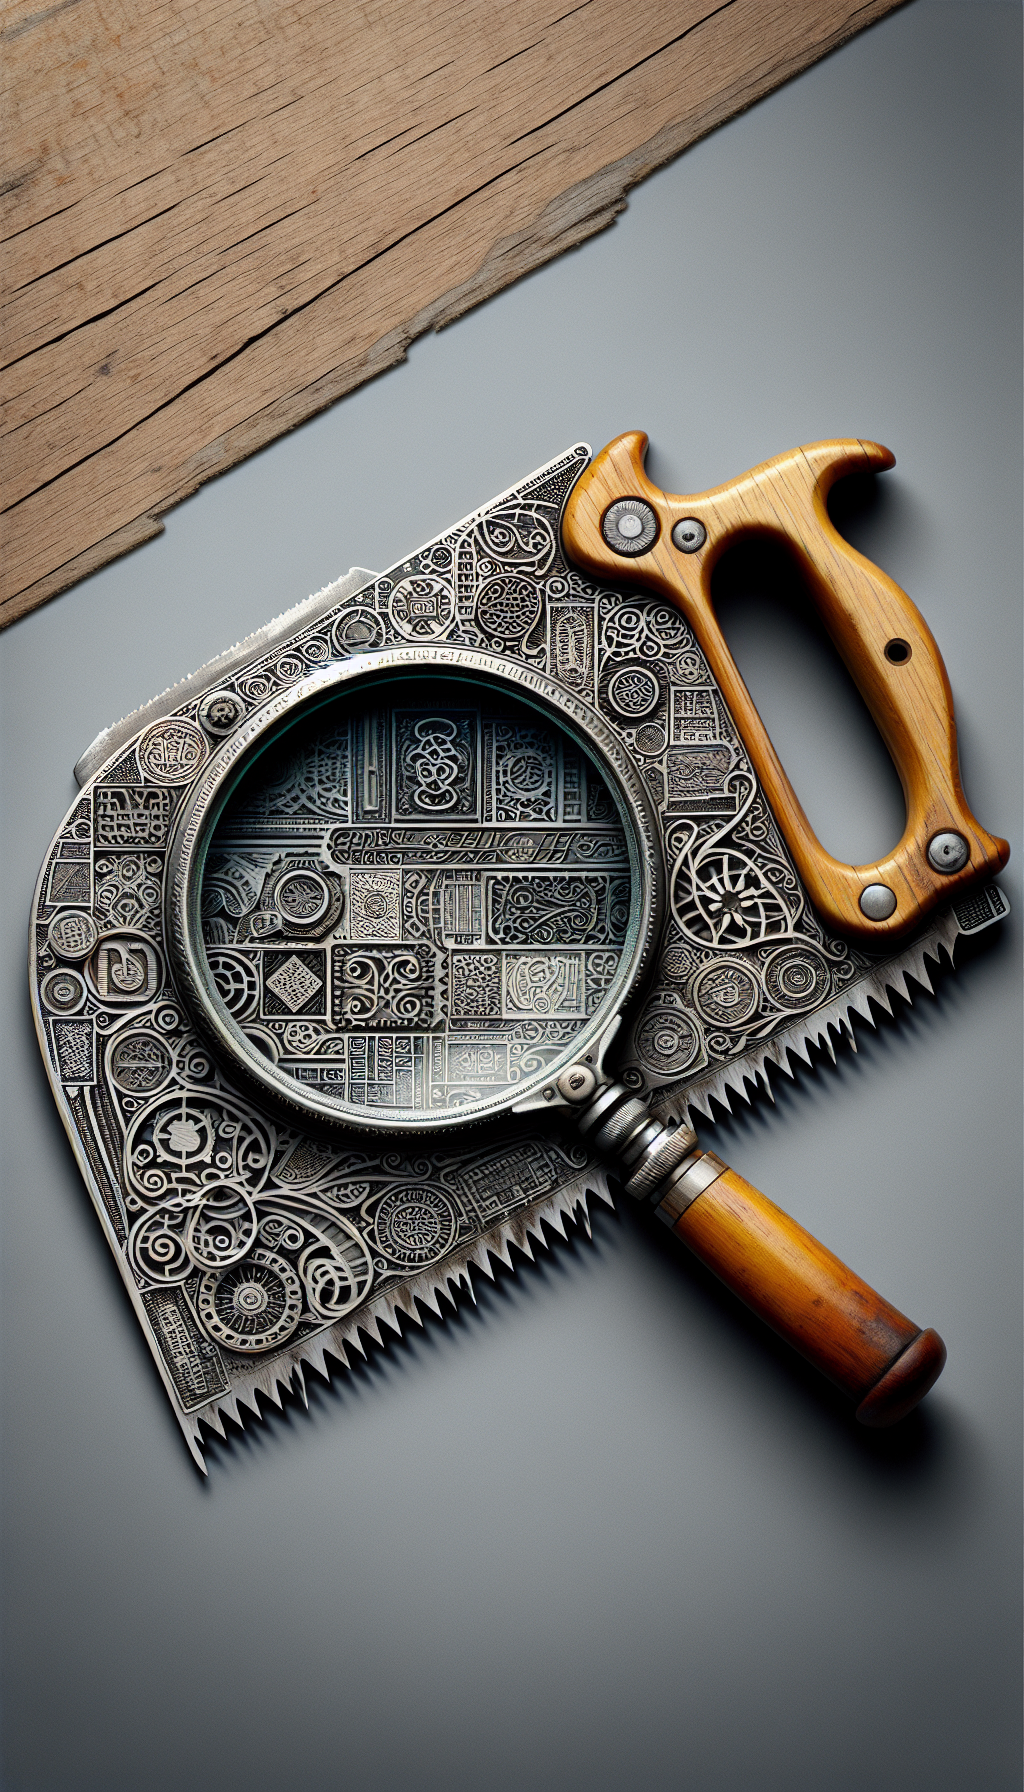 An intricately detailed magnifying glass hovers over a vintage hand saw, its lens revealing a tapestry of magnified stamps and labels, each intricately styled to reflect the era of its saw maker. This mosaic of marks, ranging from art nouveau swirls to industrial block fonts, converges into a visual guidebook, subtly forming a fingerprint pattern on the saw's blade for antique identification.